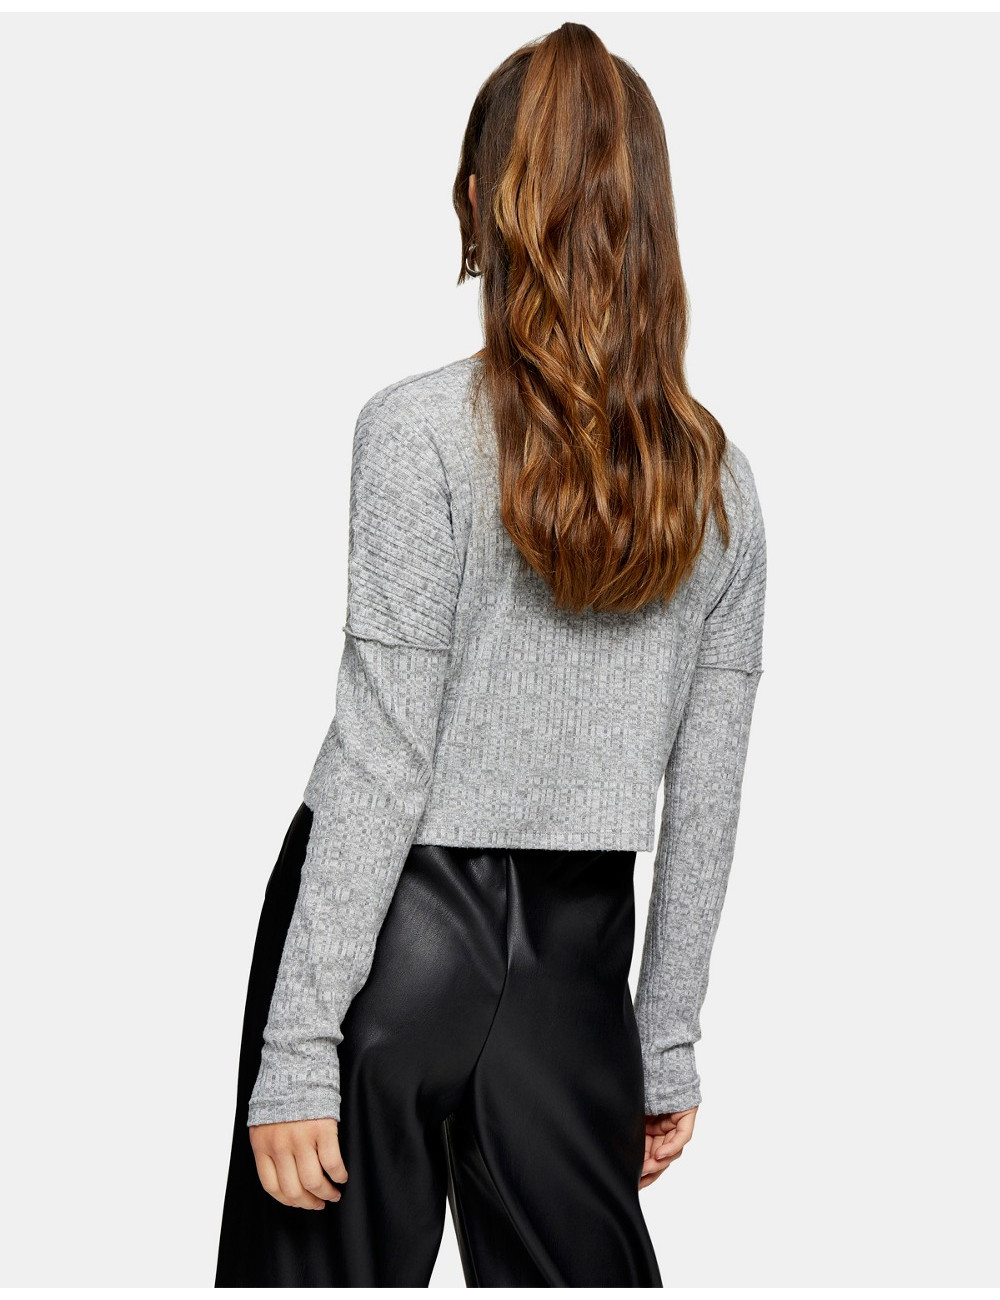 Topshop Petite cut and sew...